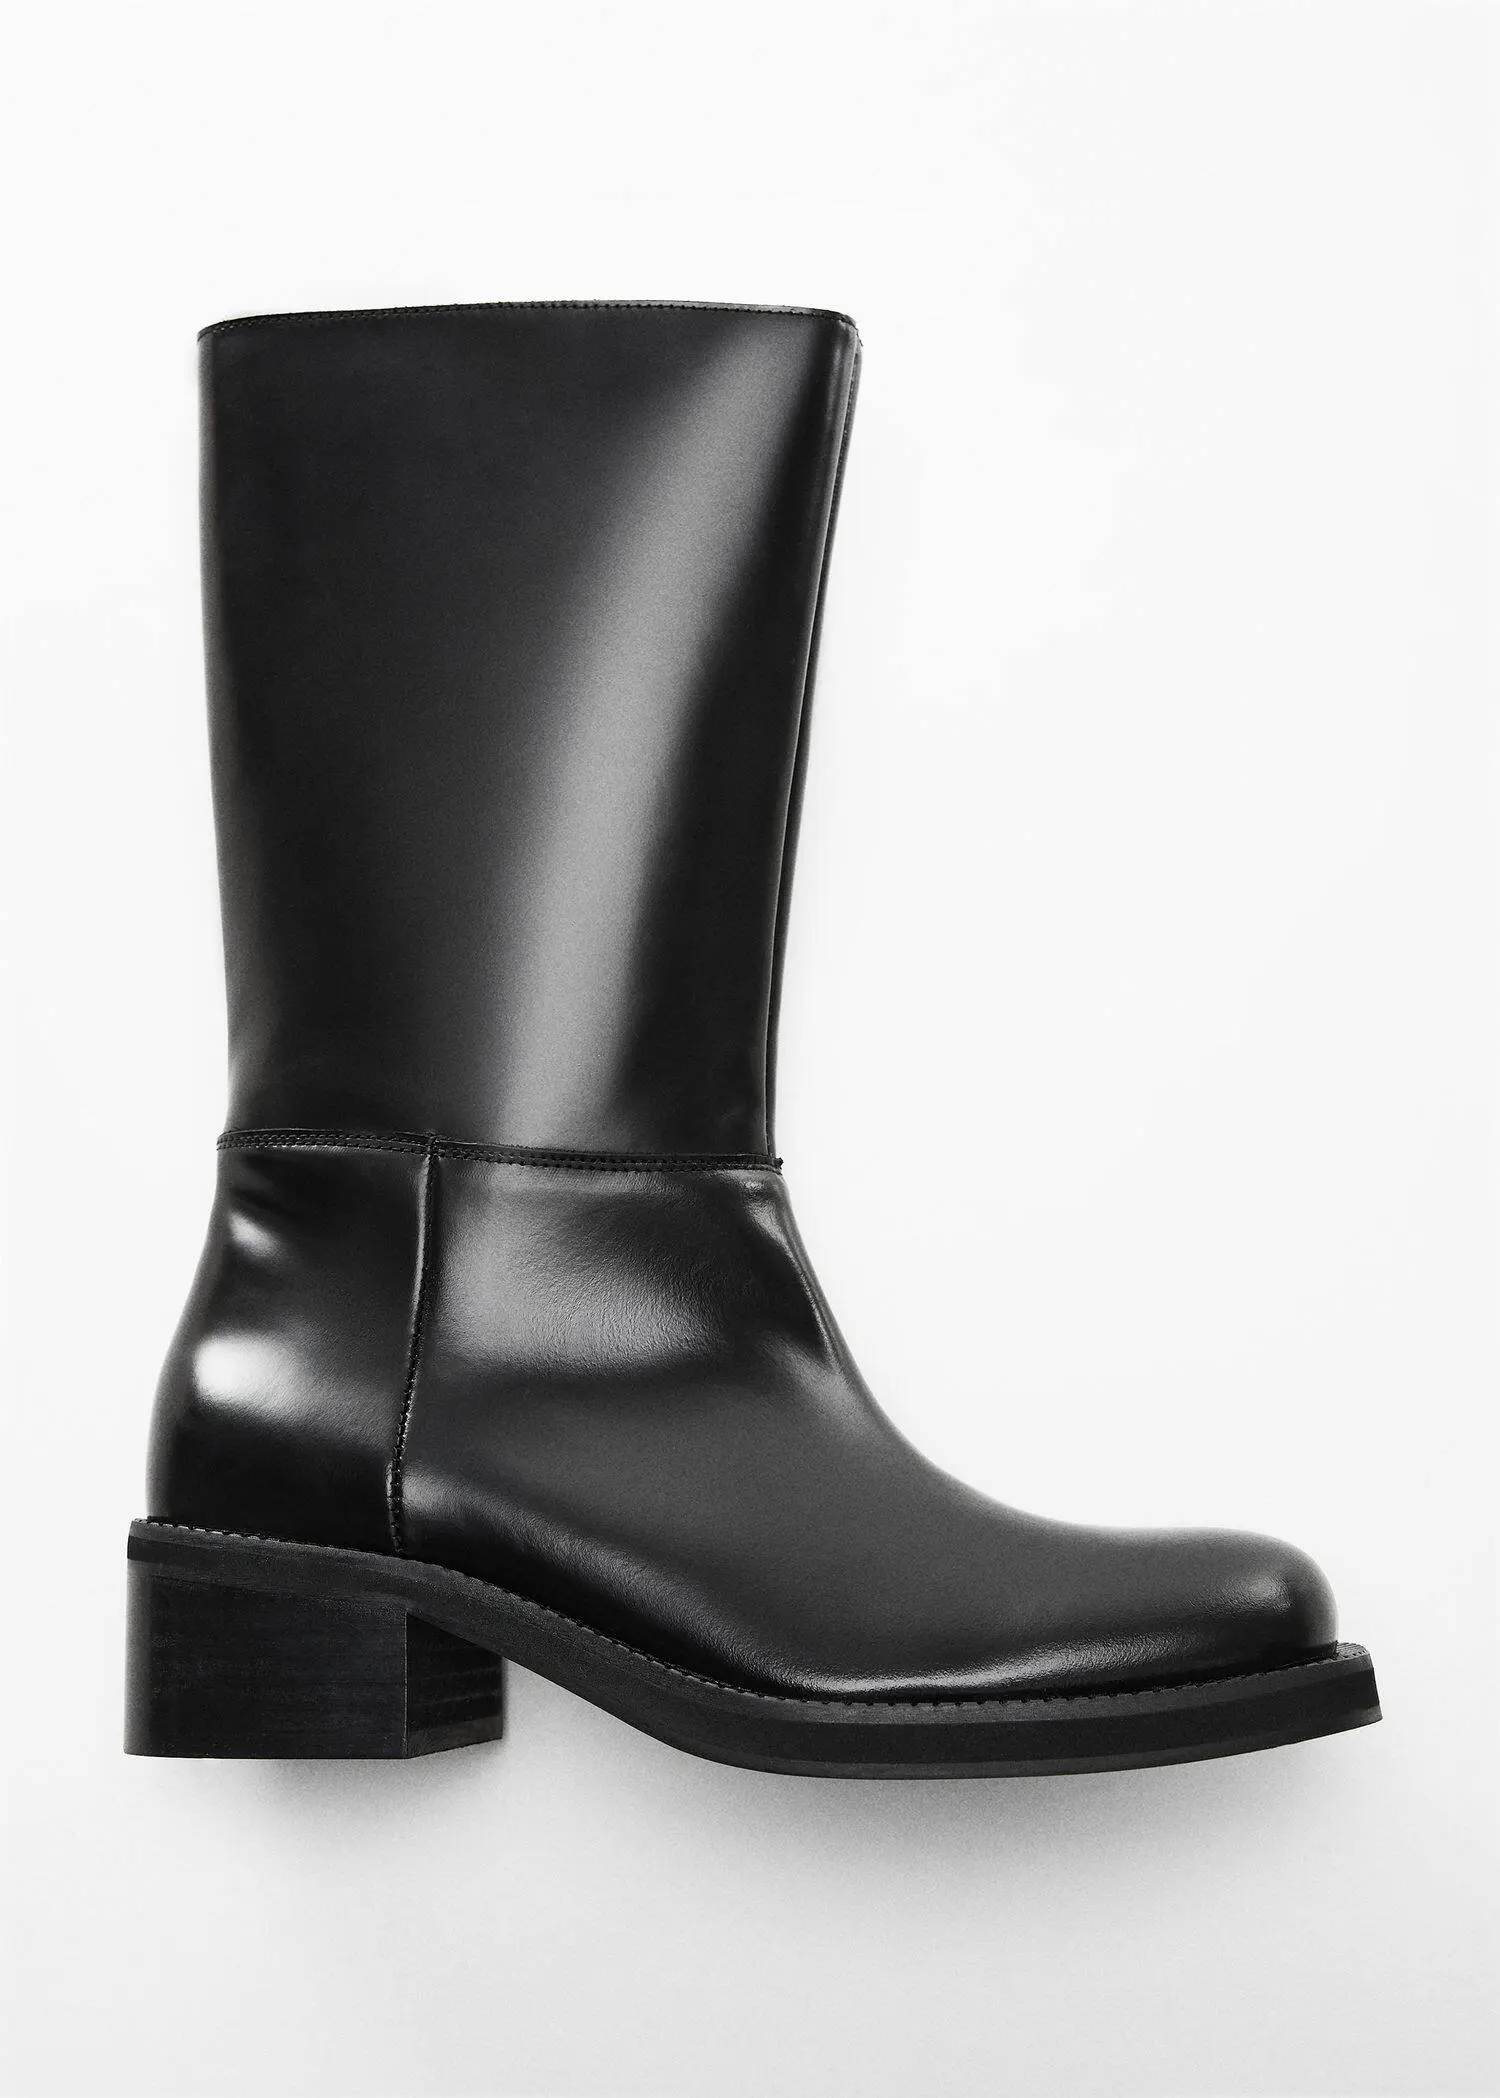 Mango Leather boots with zipper closure. 1